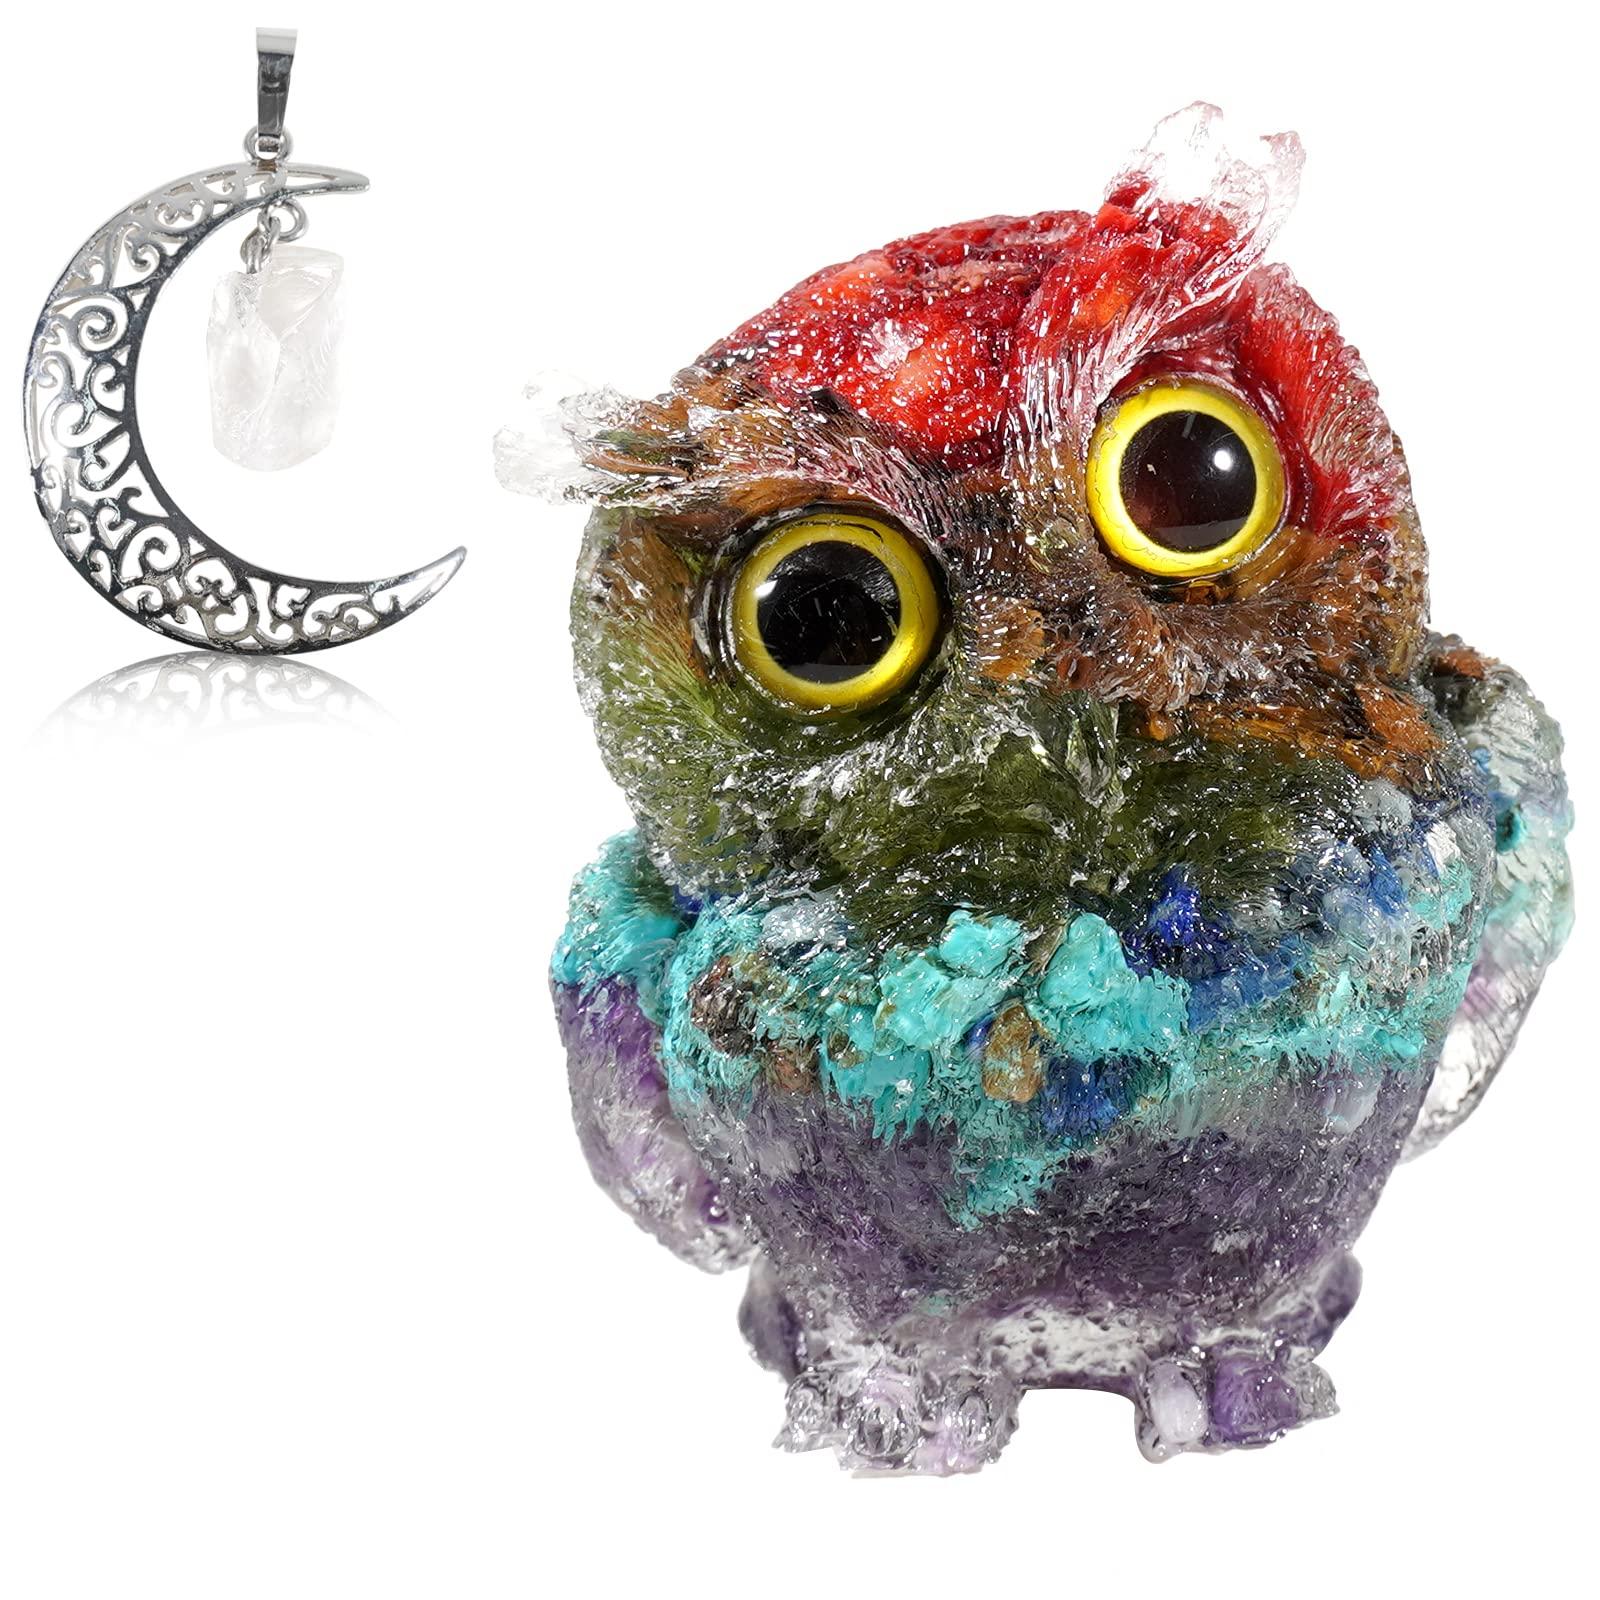 Soulnioi Gemstone Moon Necklace Antique Silver Plated Crystal Necklace Pendant (Rose Quartz) , Crystal Owl Statue Ornament Resin Chip Stones Figurine for Home Office Decor(Colored) 0